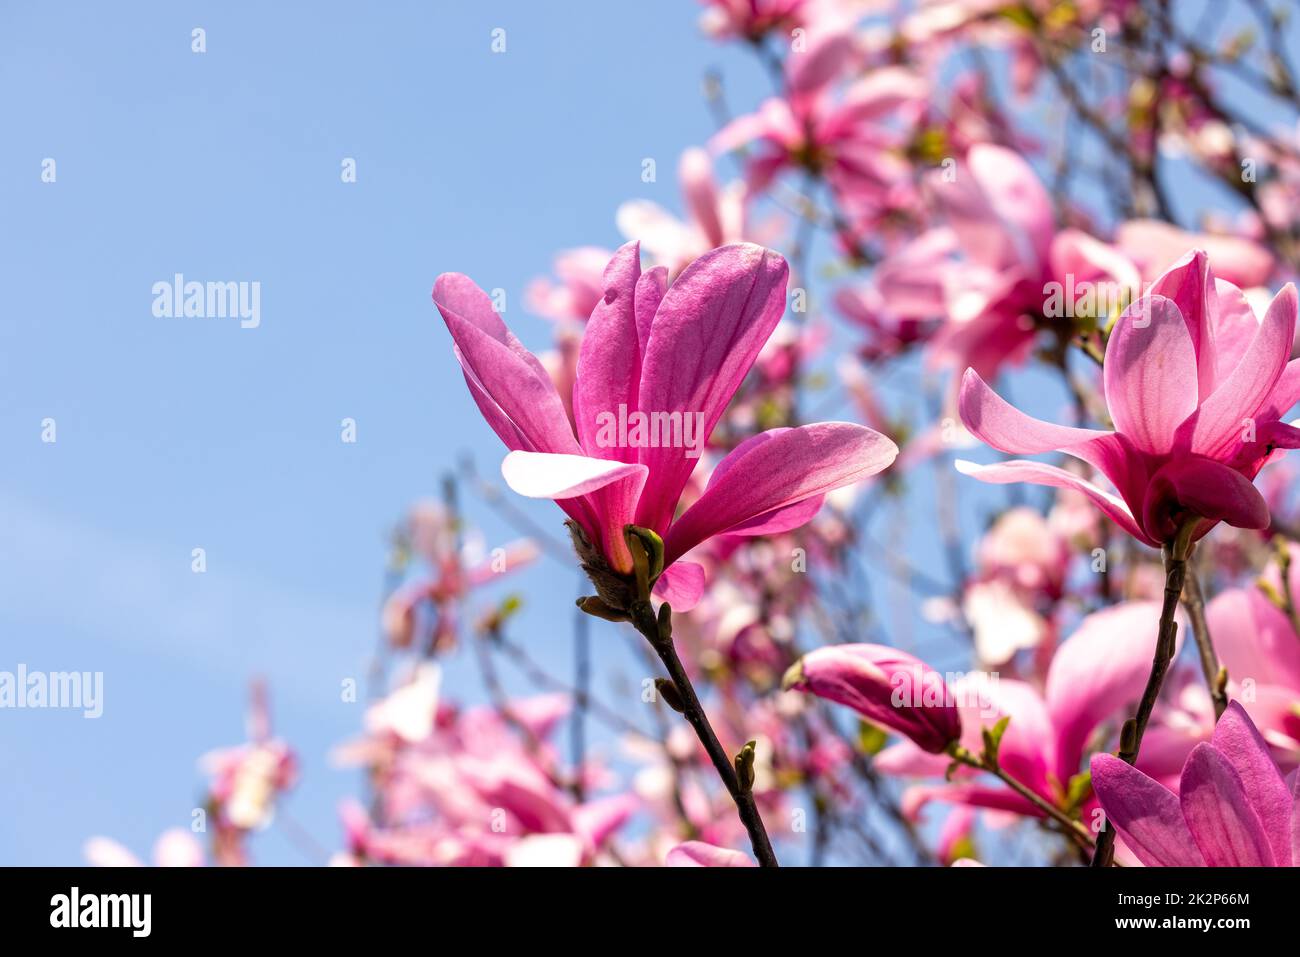 Pink magnolia flowers on a tree branch. Stock Photo